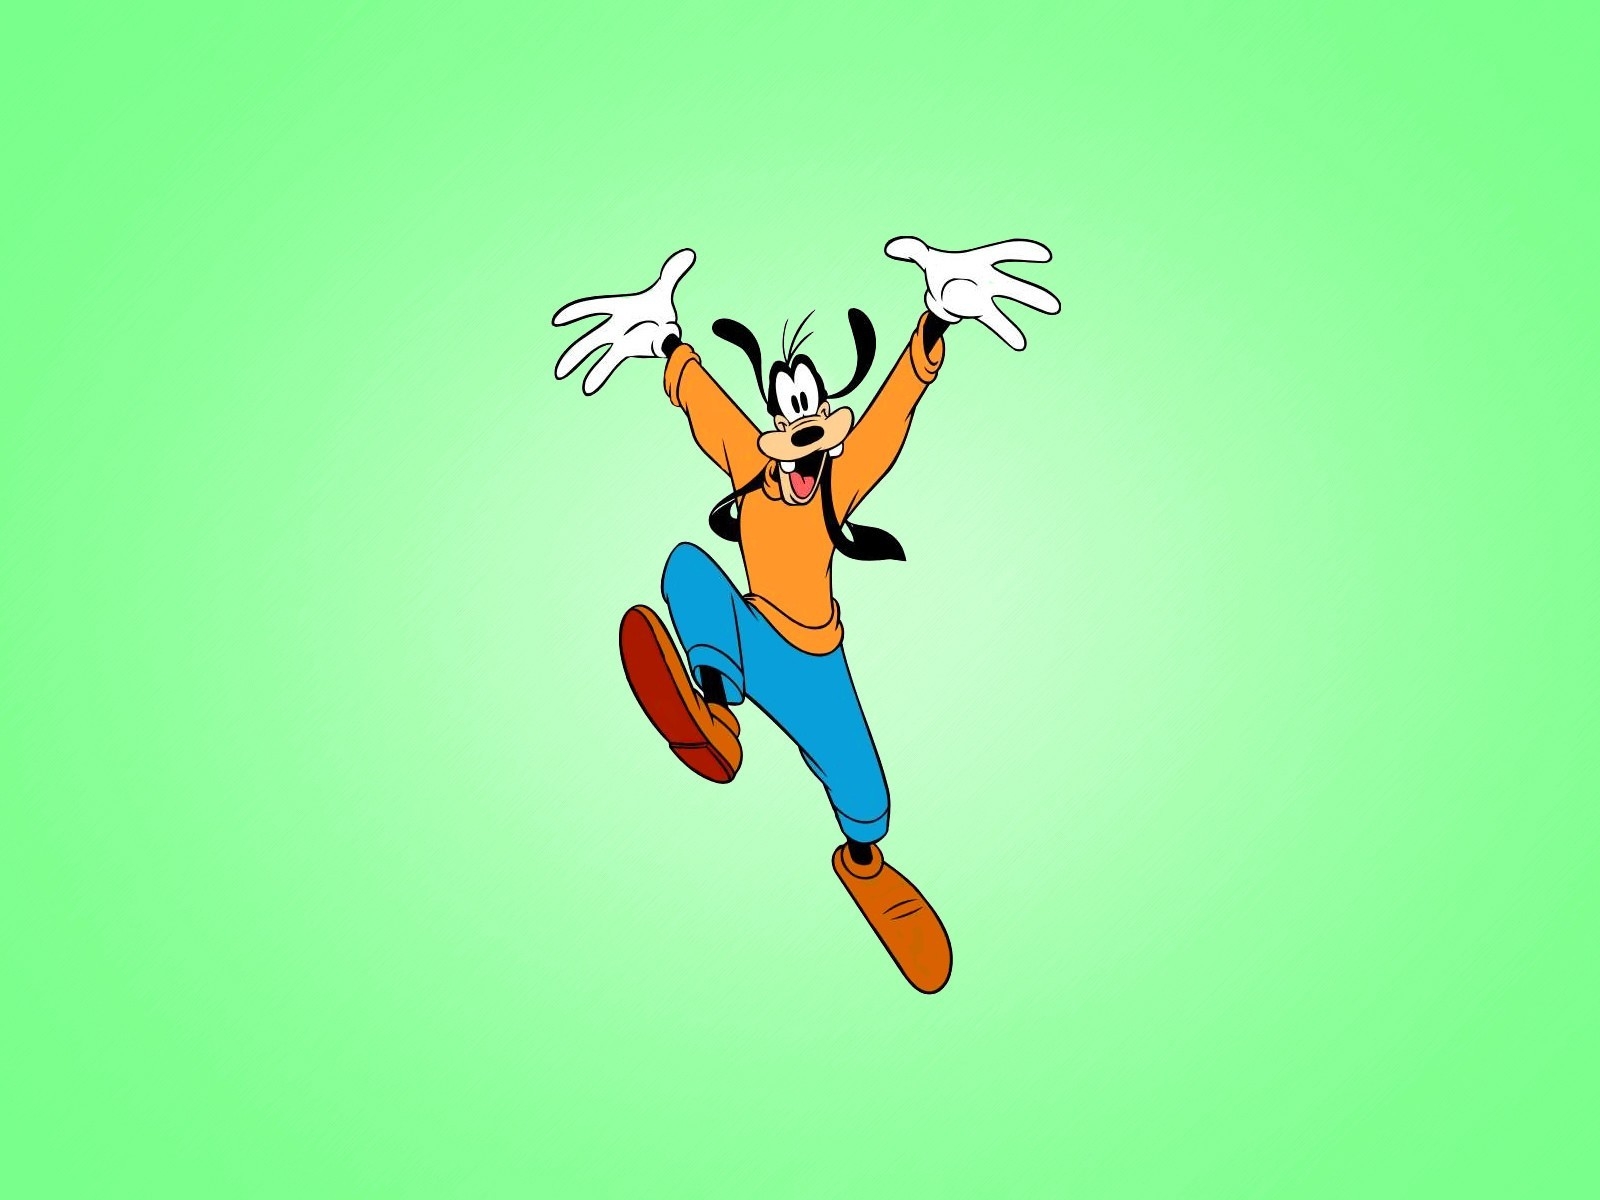 Goofy Character for 1600 x 1200 resolution